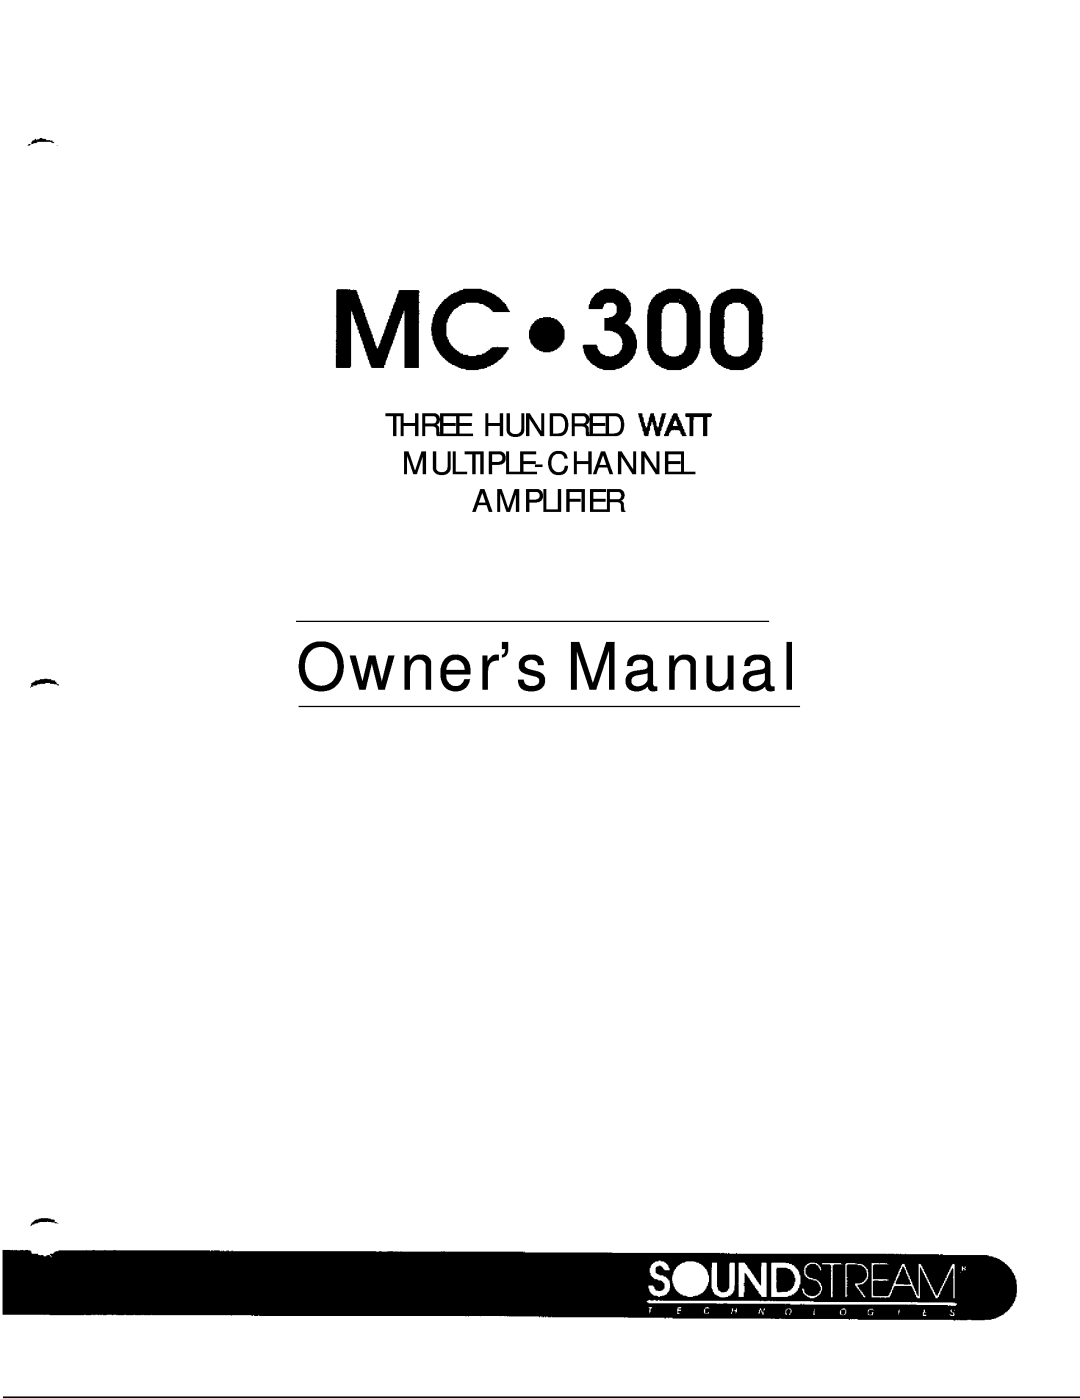 Soundstream Technologies MC-300 owner manual MCa300, THREE HUNDRED WAll MULTIPLE-CHANNEL AMPLIFIER 